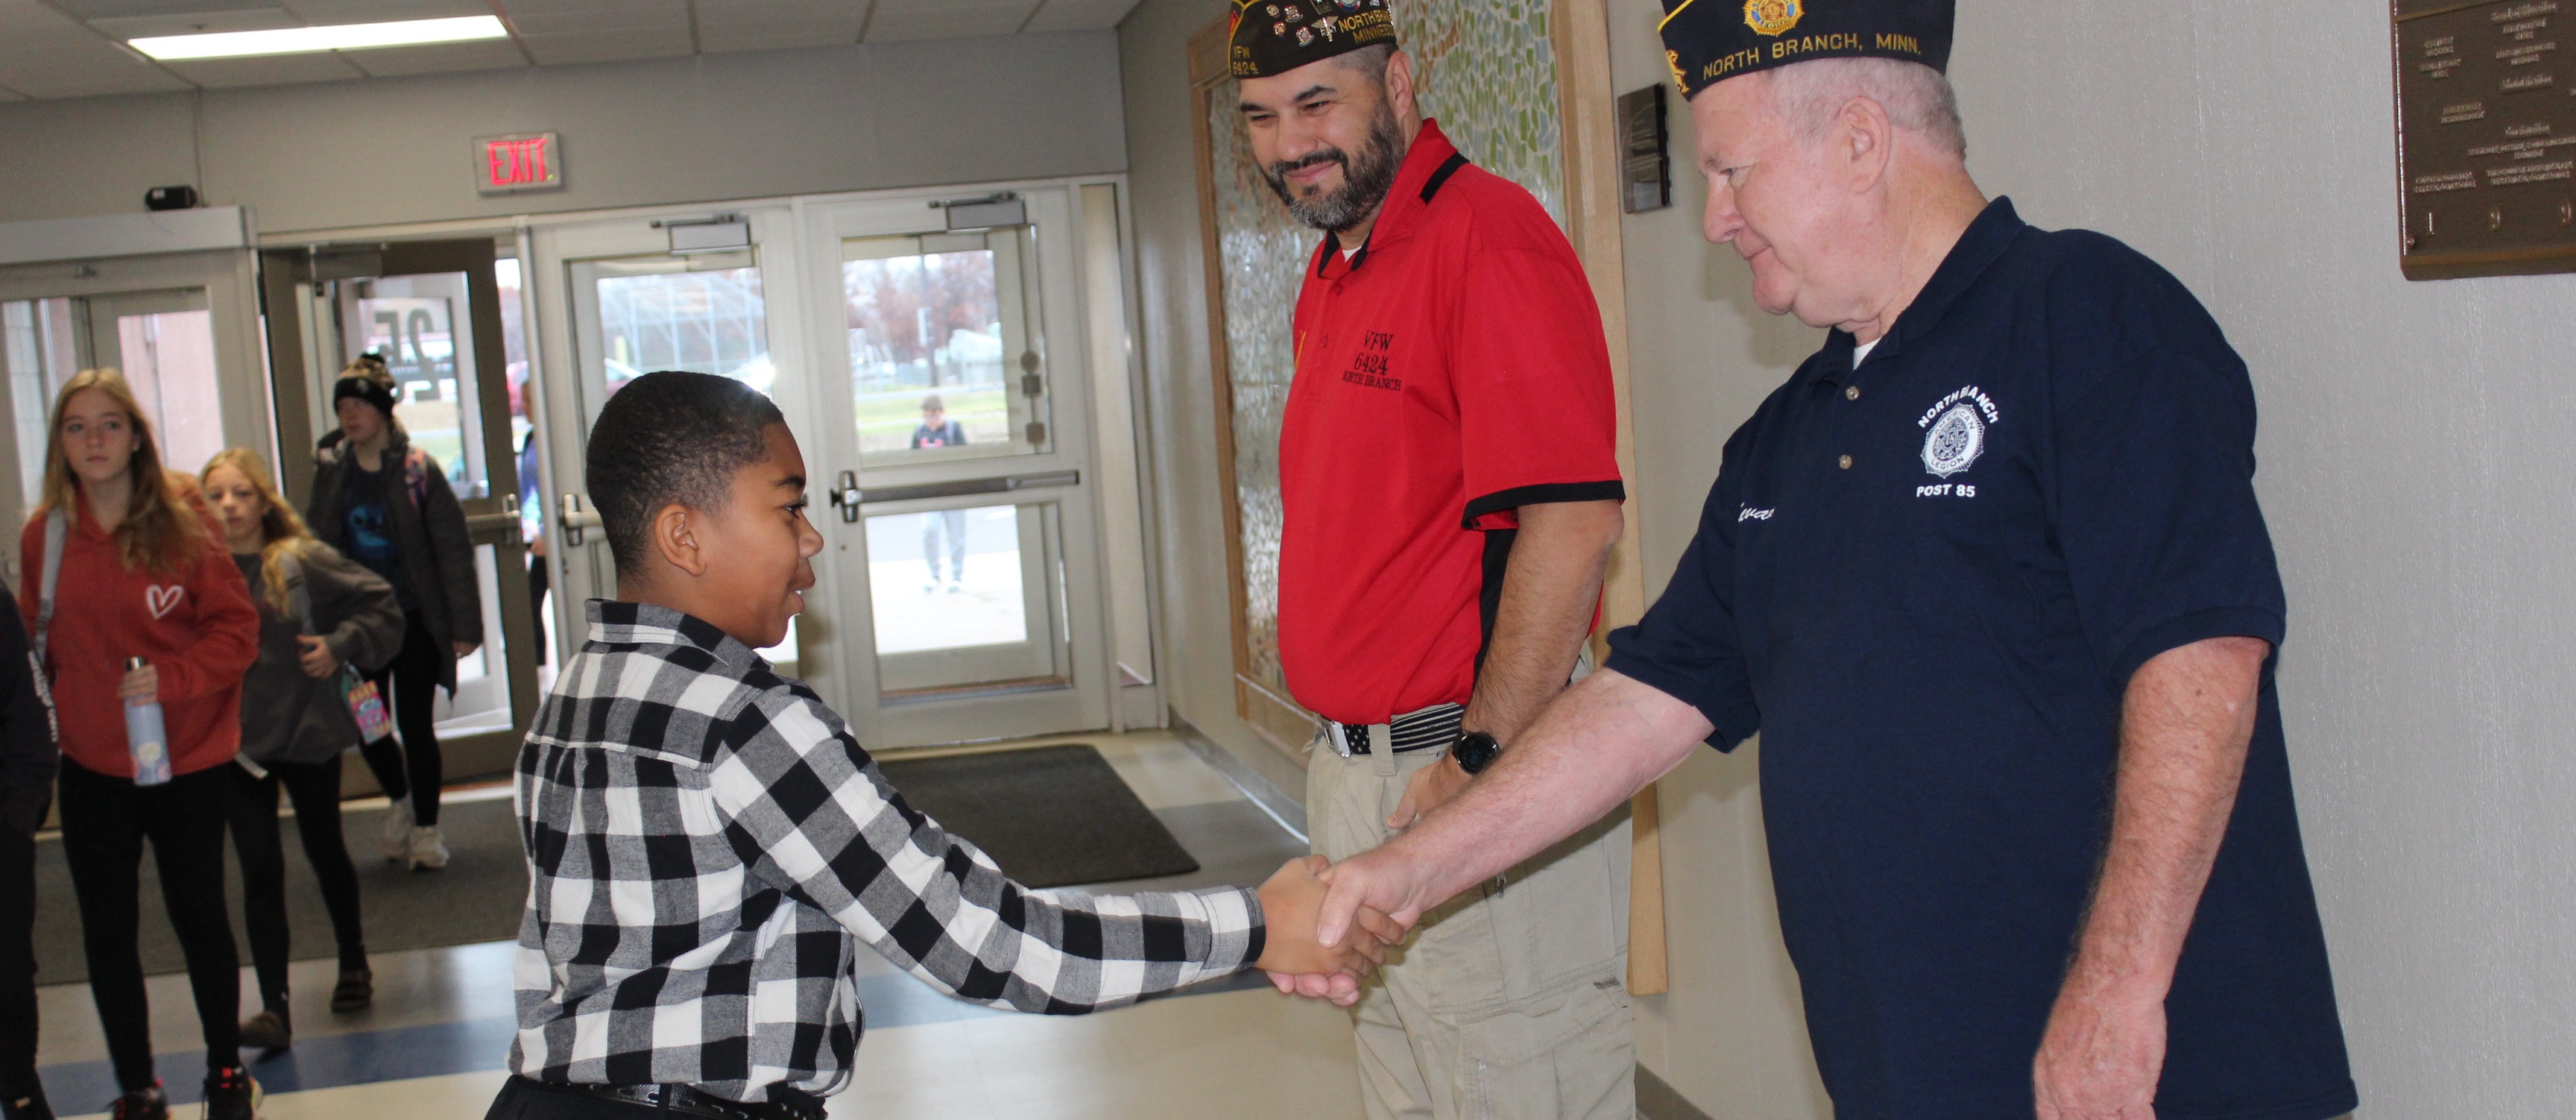 Student shaking hands with veteran